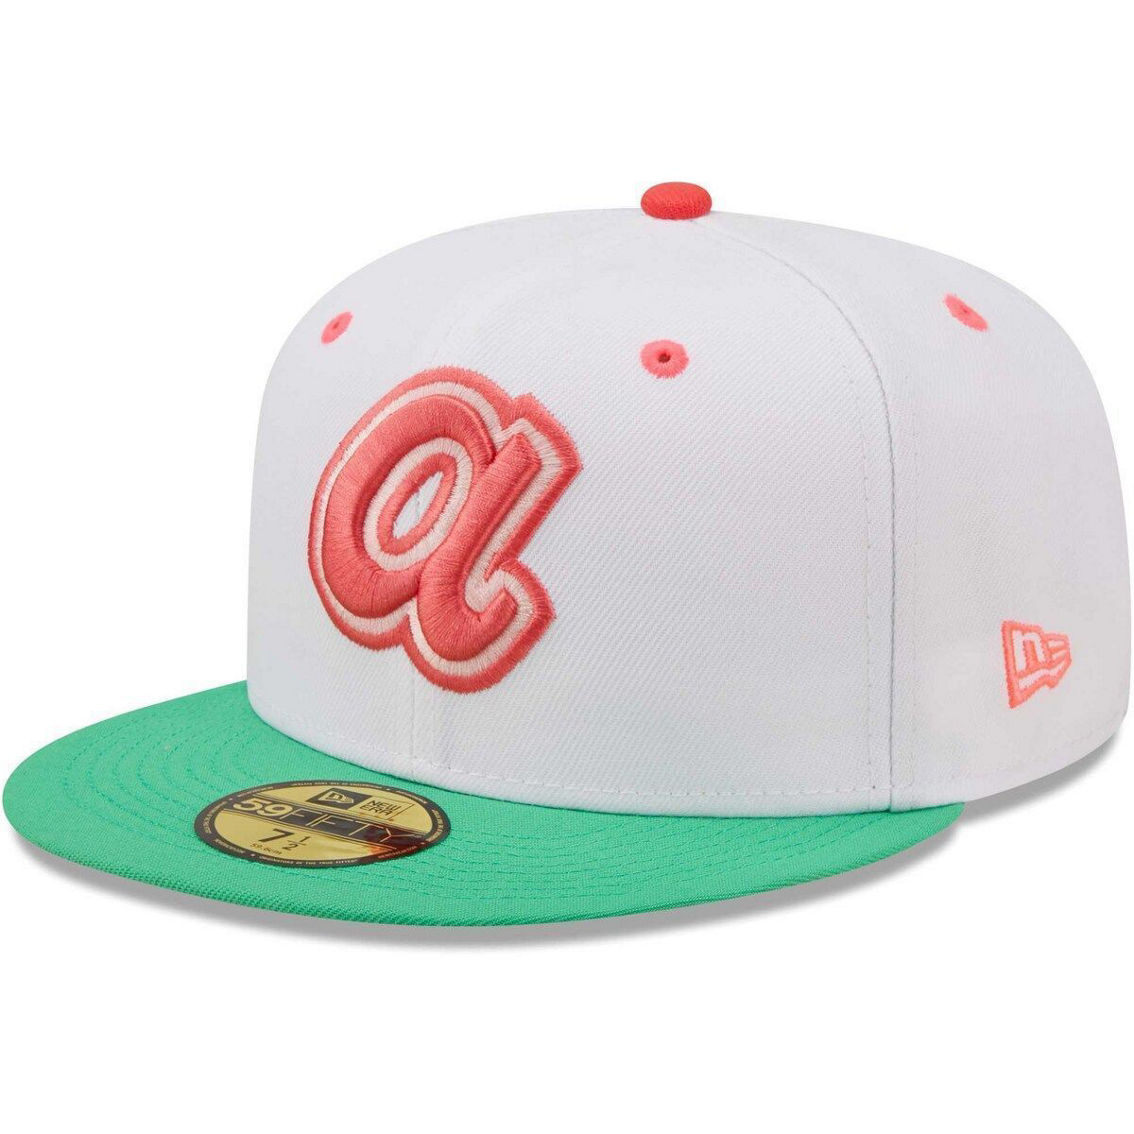 New Era Men's White/Green Atlanta Braves 1972 MLB All-Star Game Watermelon Lolli 59FIFTY Fitted Hat - Image 4 of 4